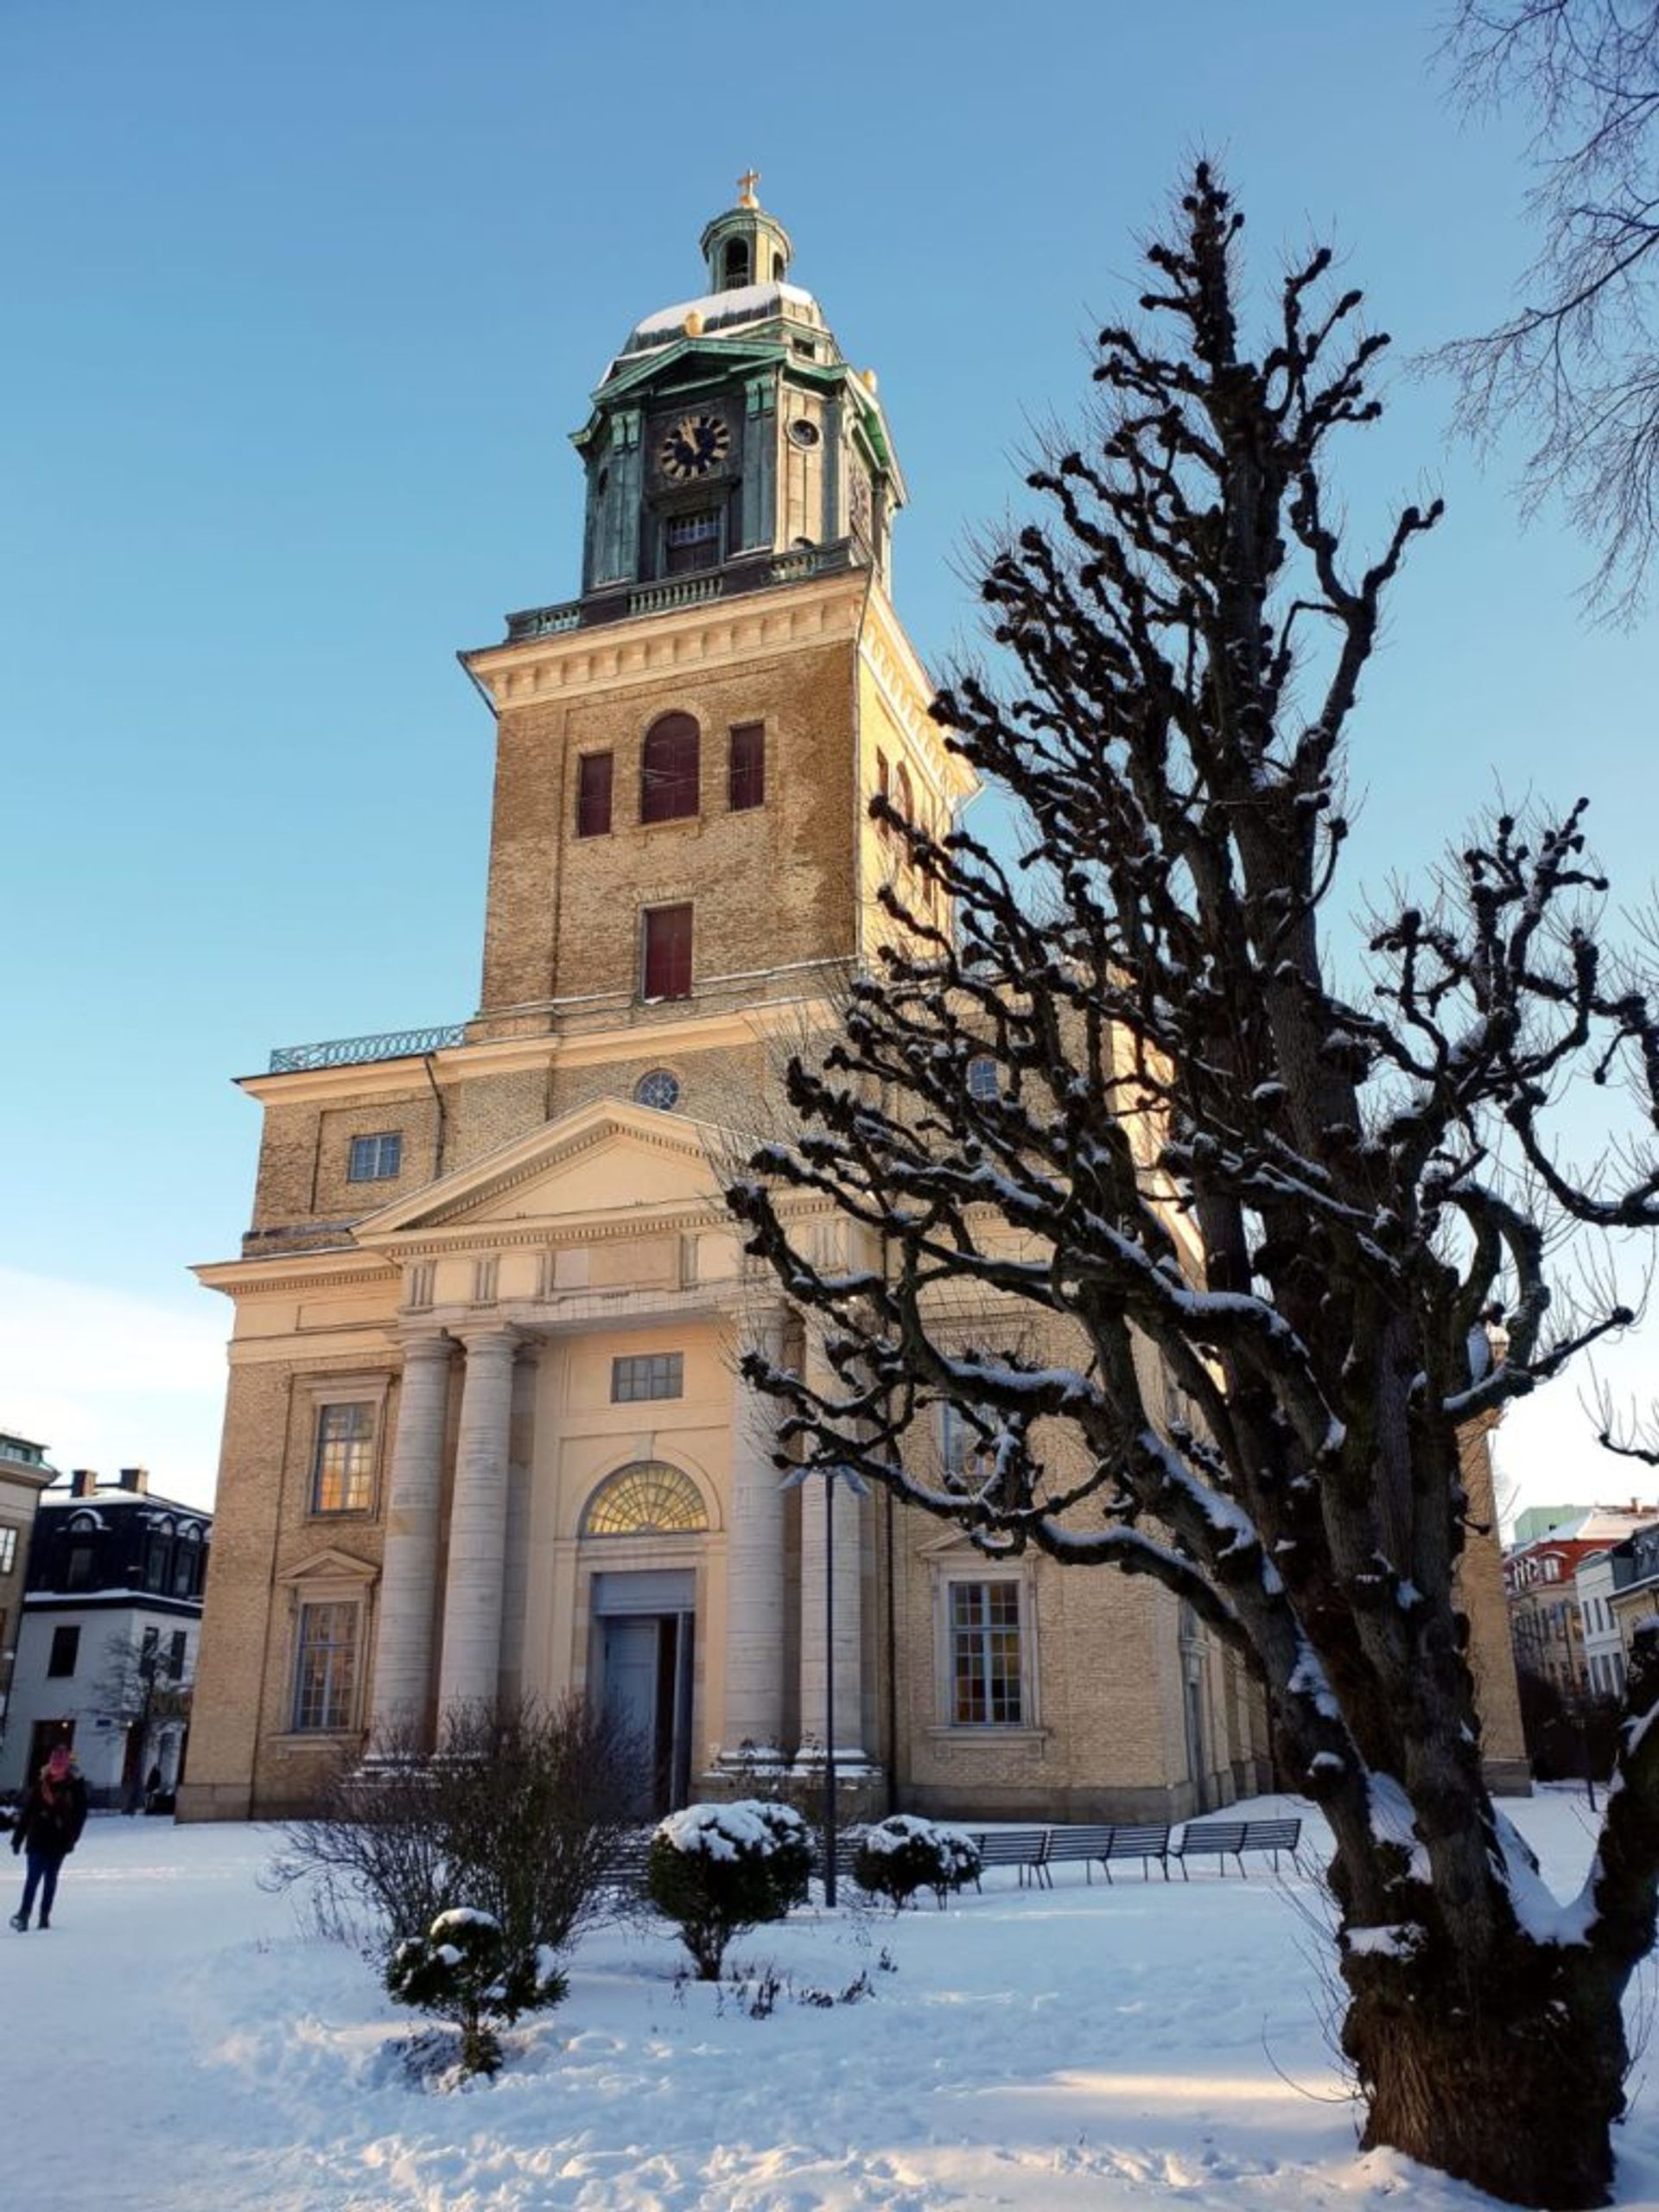 Gothenburg Cathedral from the outside/ Credit: Jano Zepter